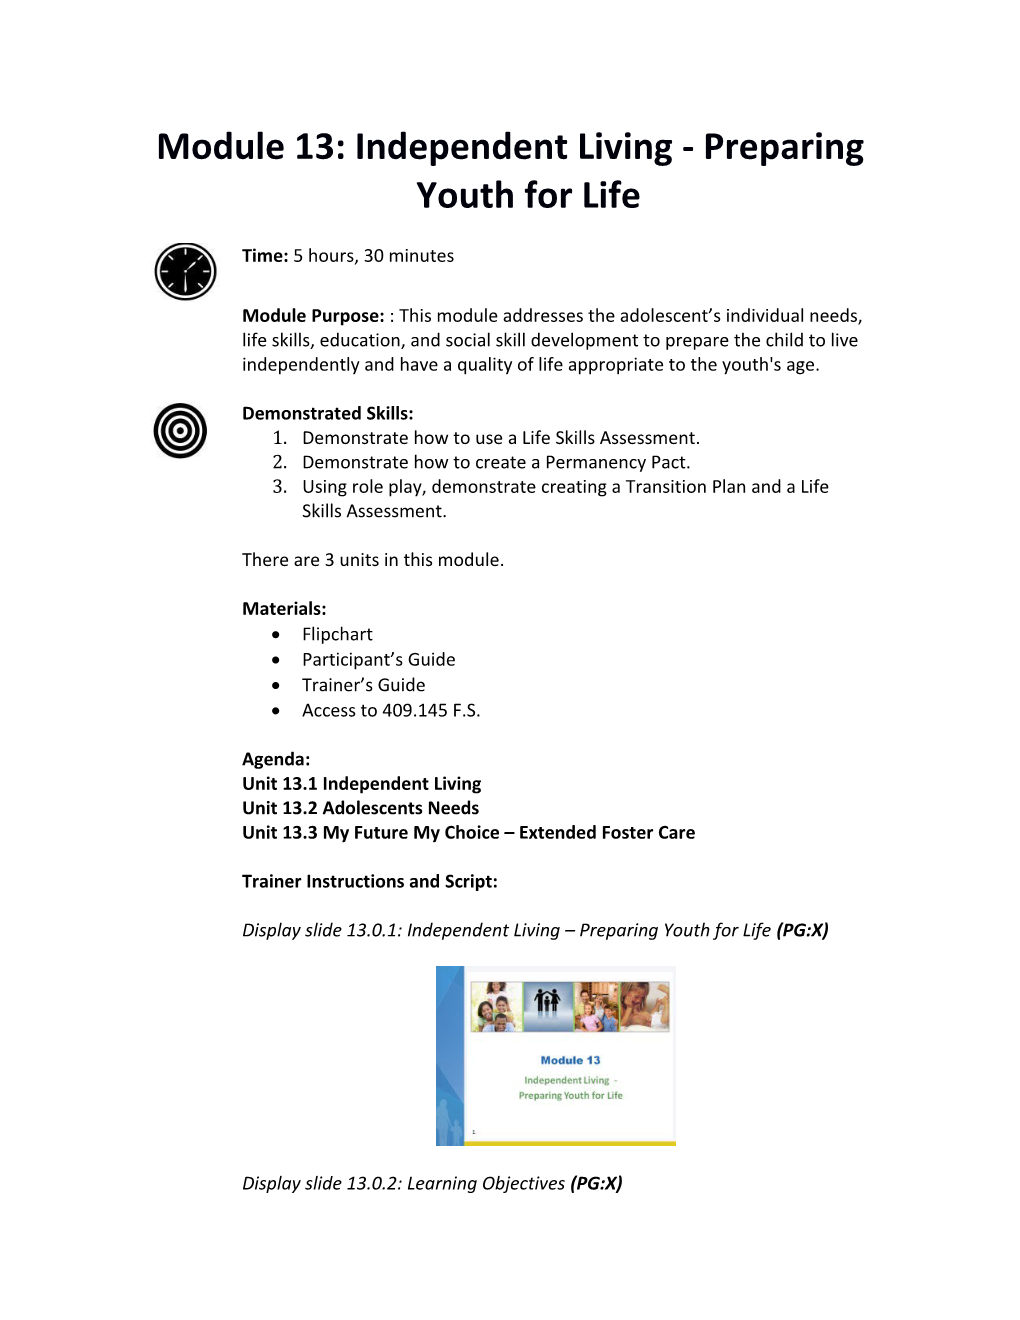 Module13: Independent Living - Preparing Youth for Life